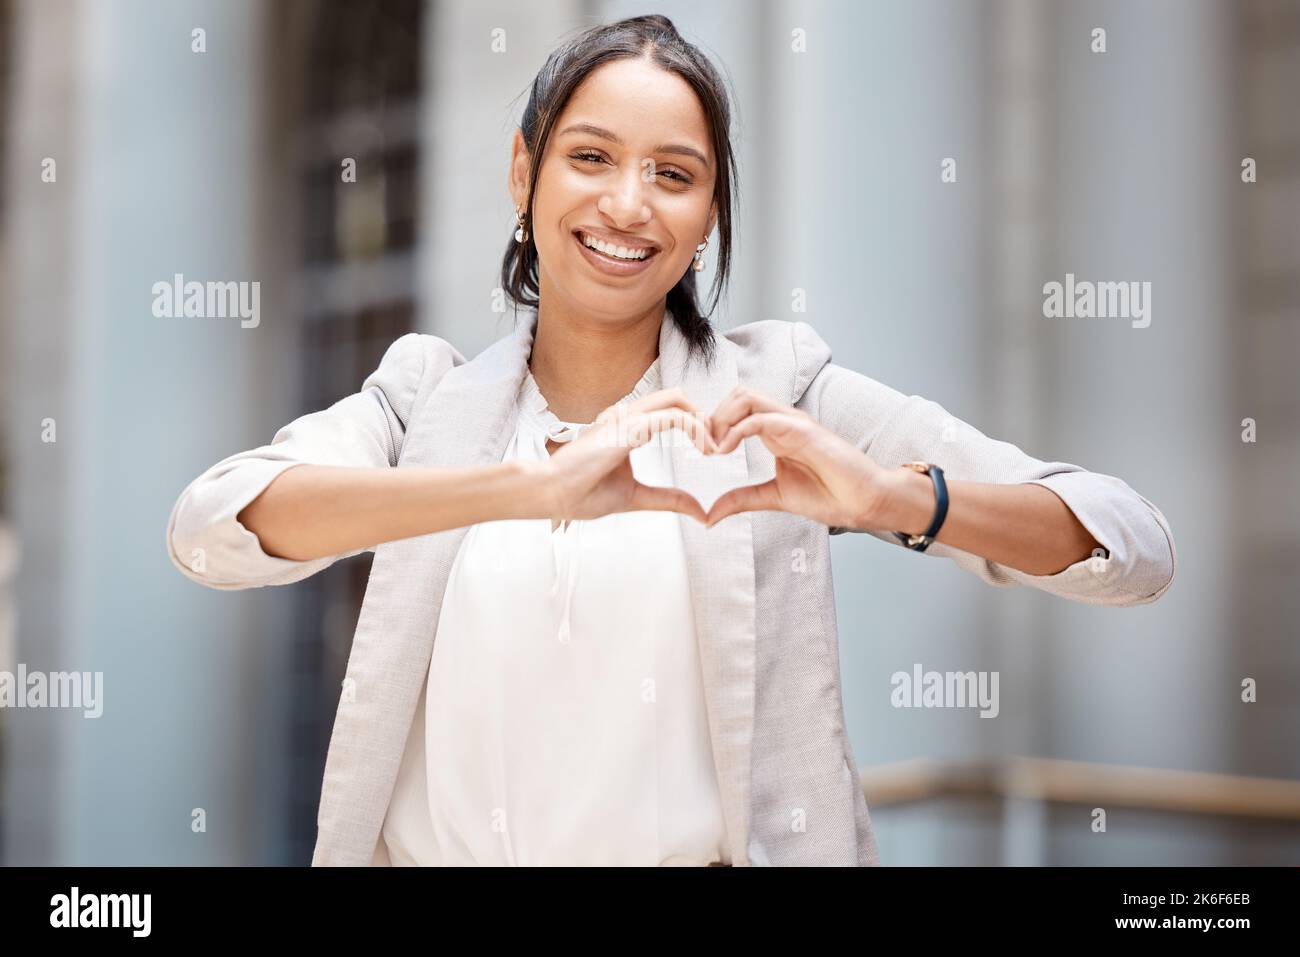 Heart, hands sign and city girl with love emoji icon, gesture or symbol for happiness or self care. Portrait smile of black woman or happy business Stock Photo